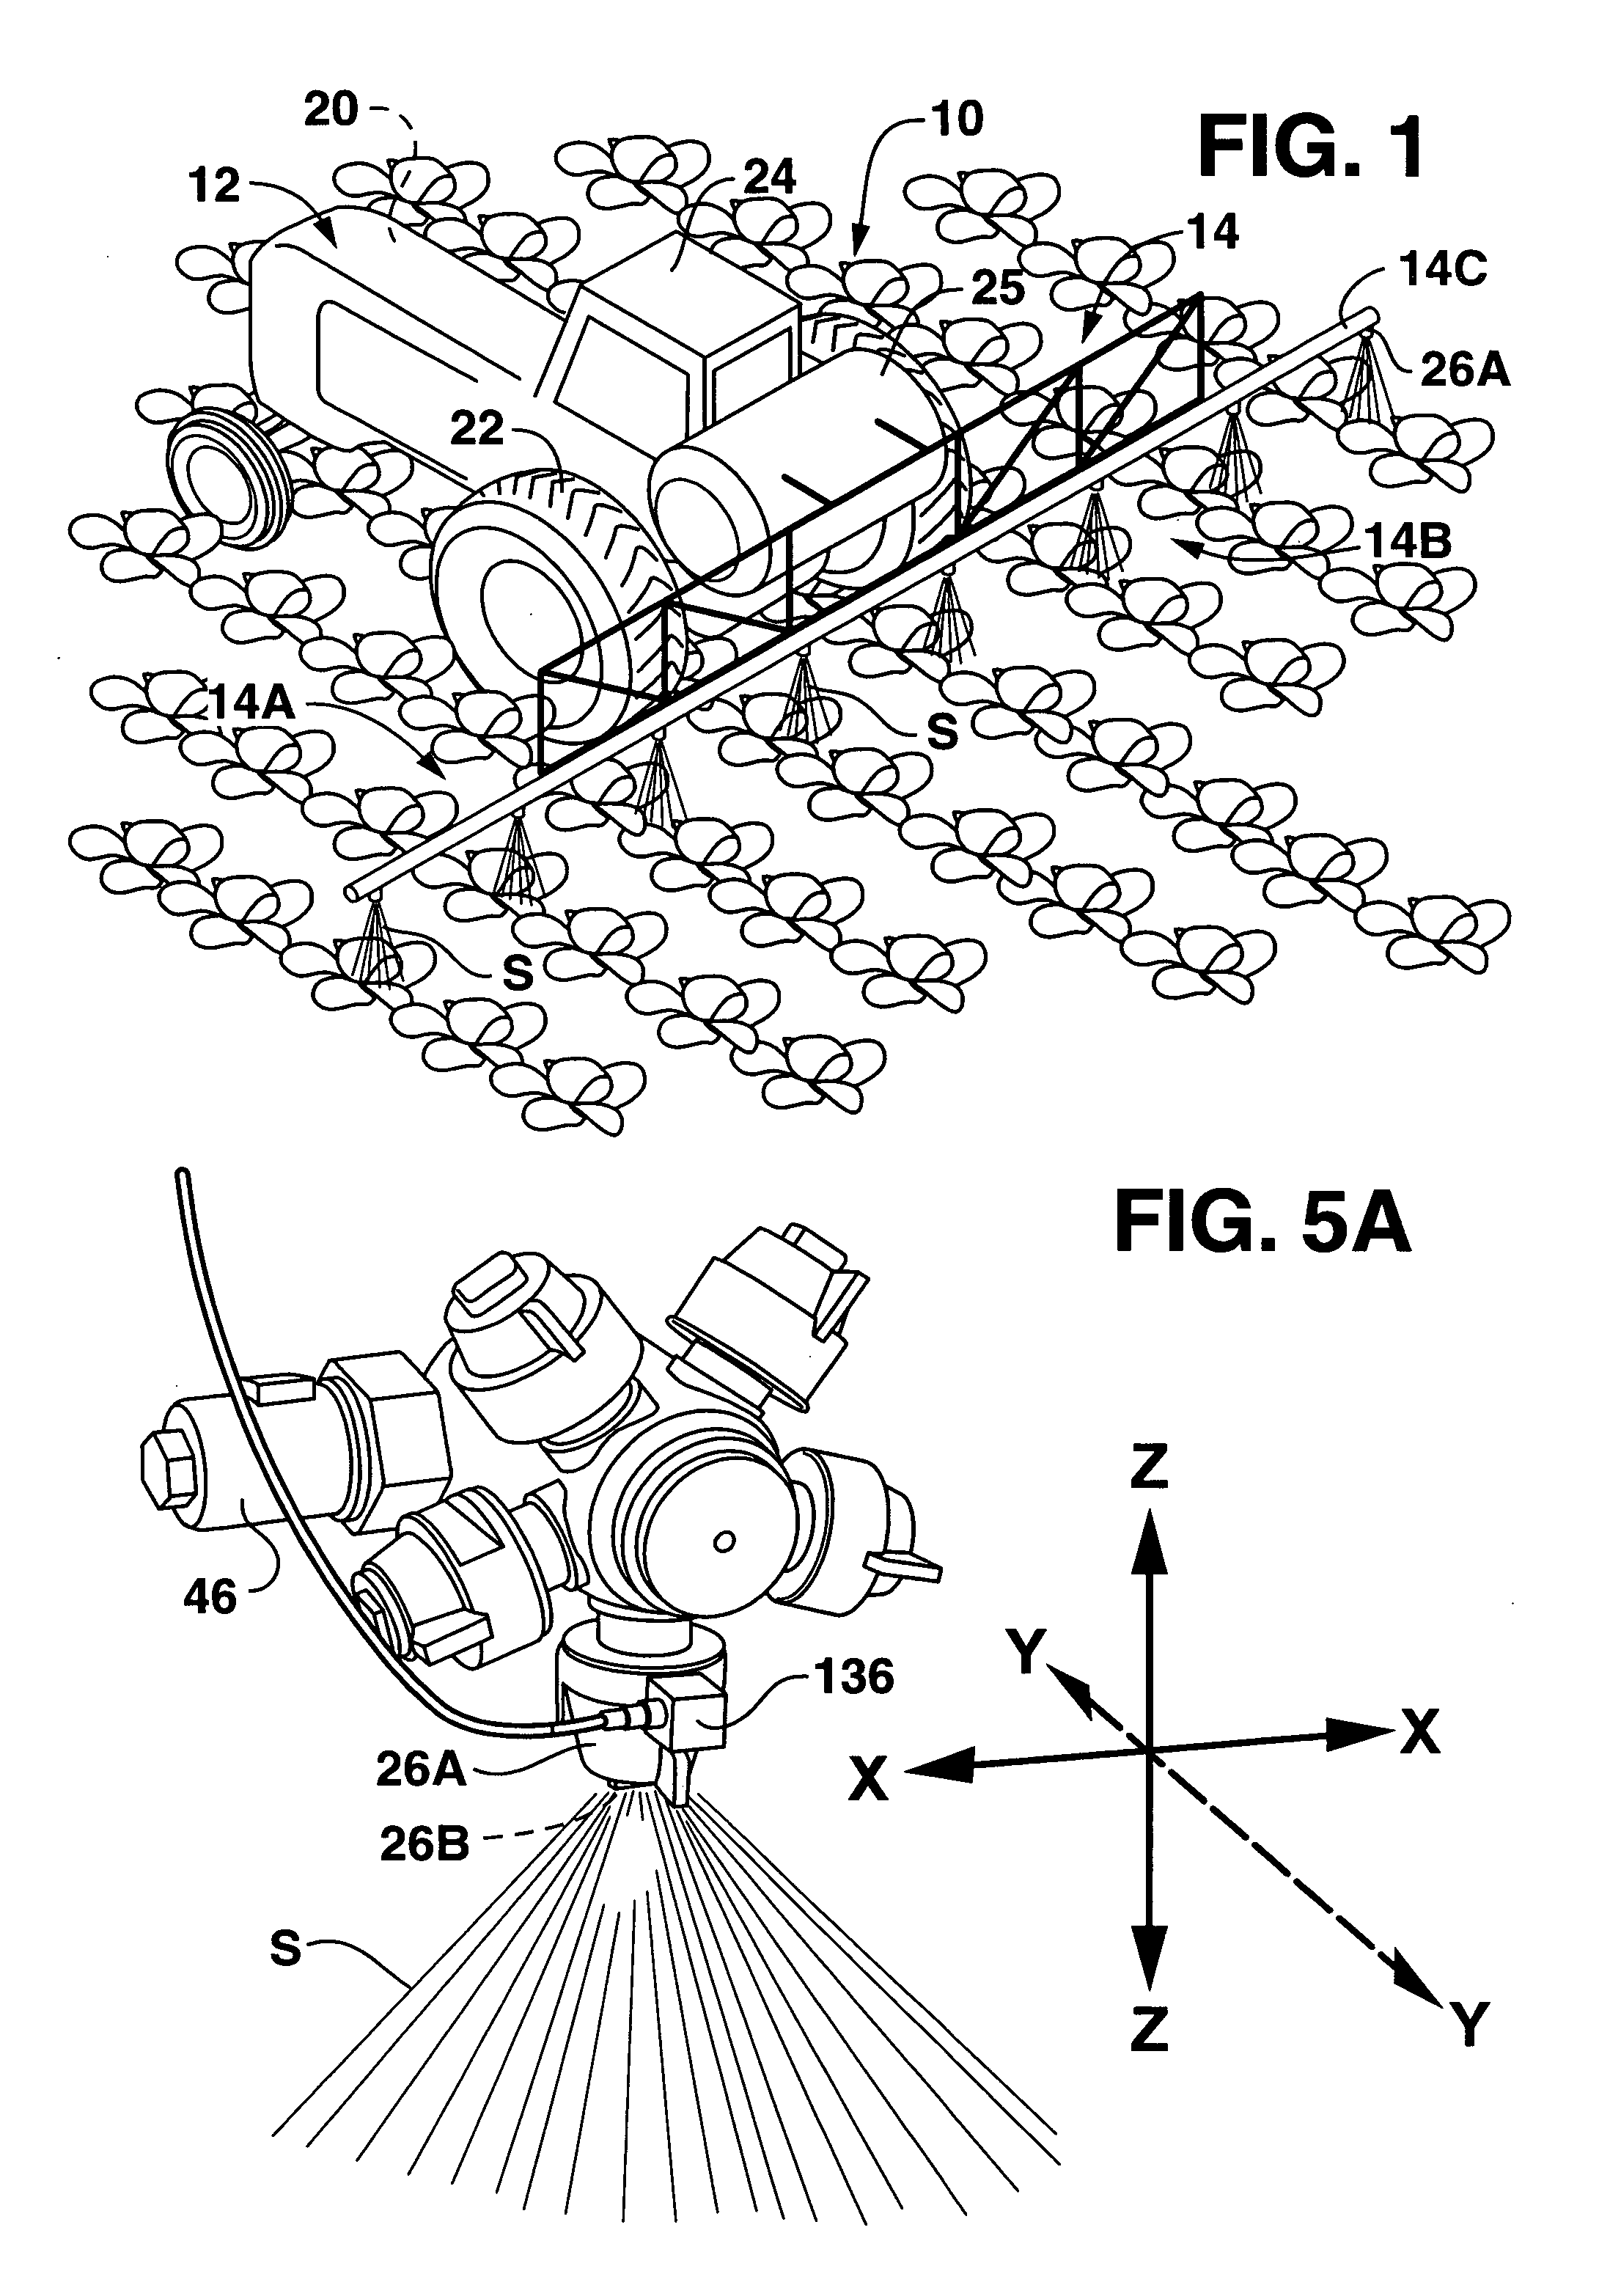 Networked diagnostic and control system for dispensing apparatus